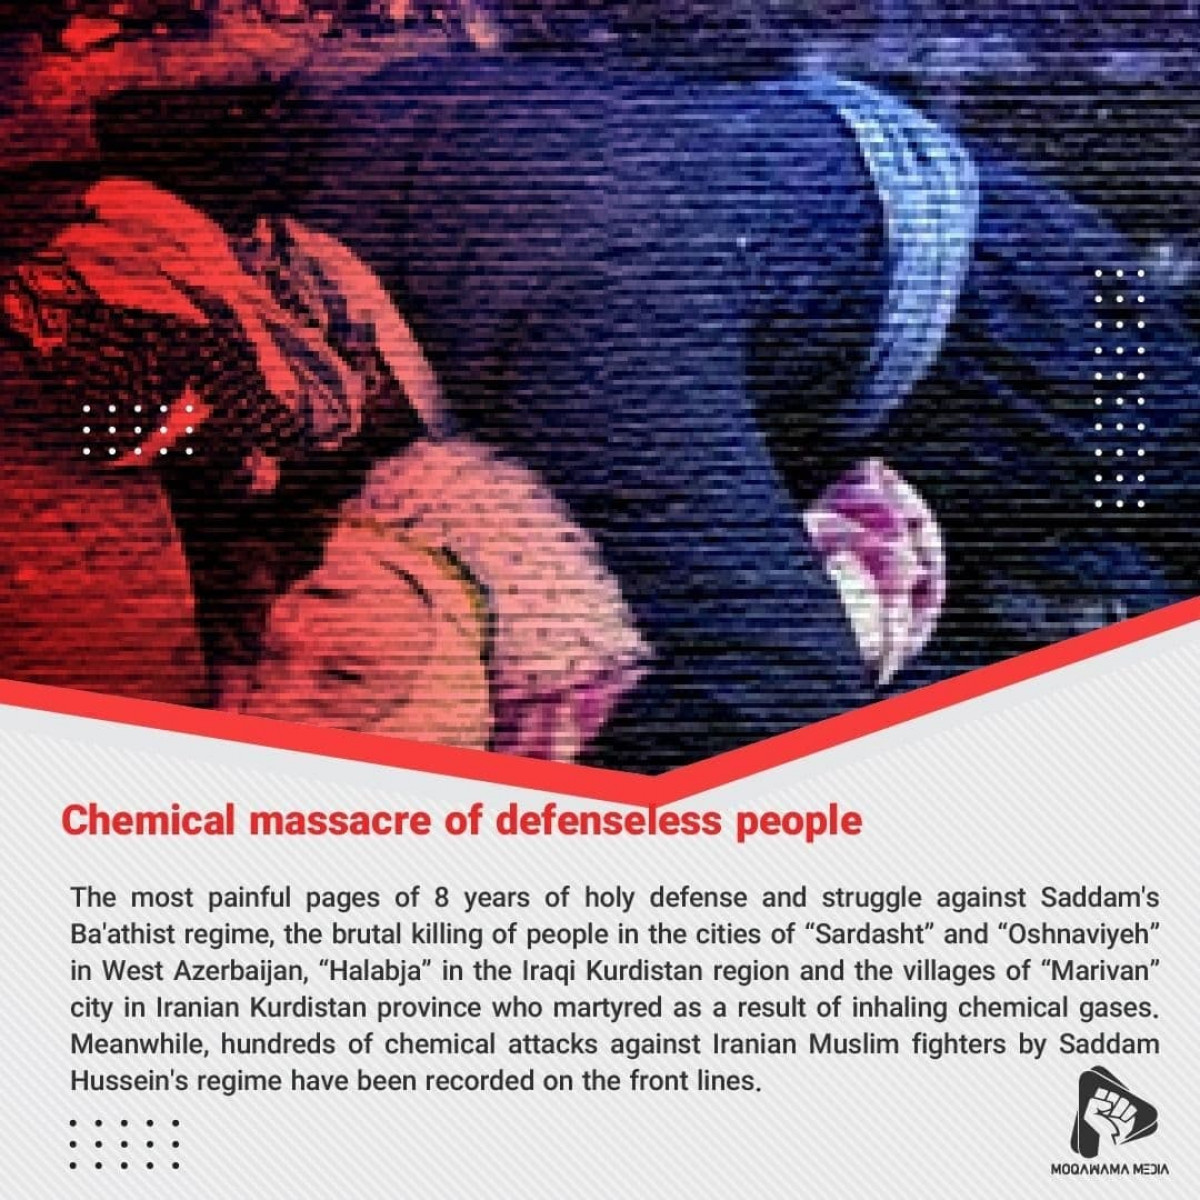 Collection of posters: Chemical massacre of defenseless people